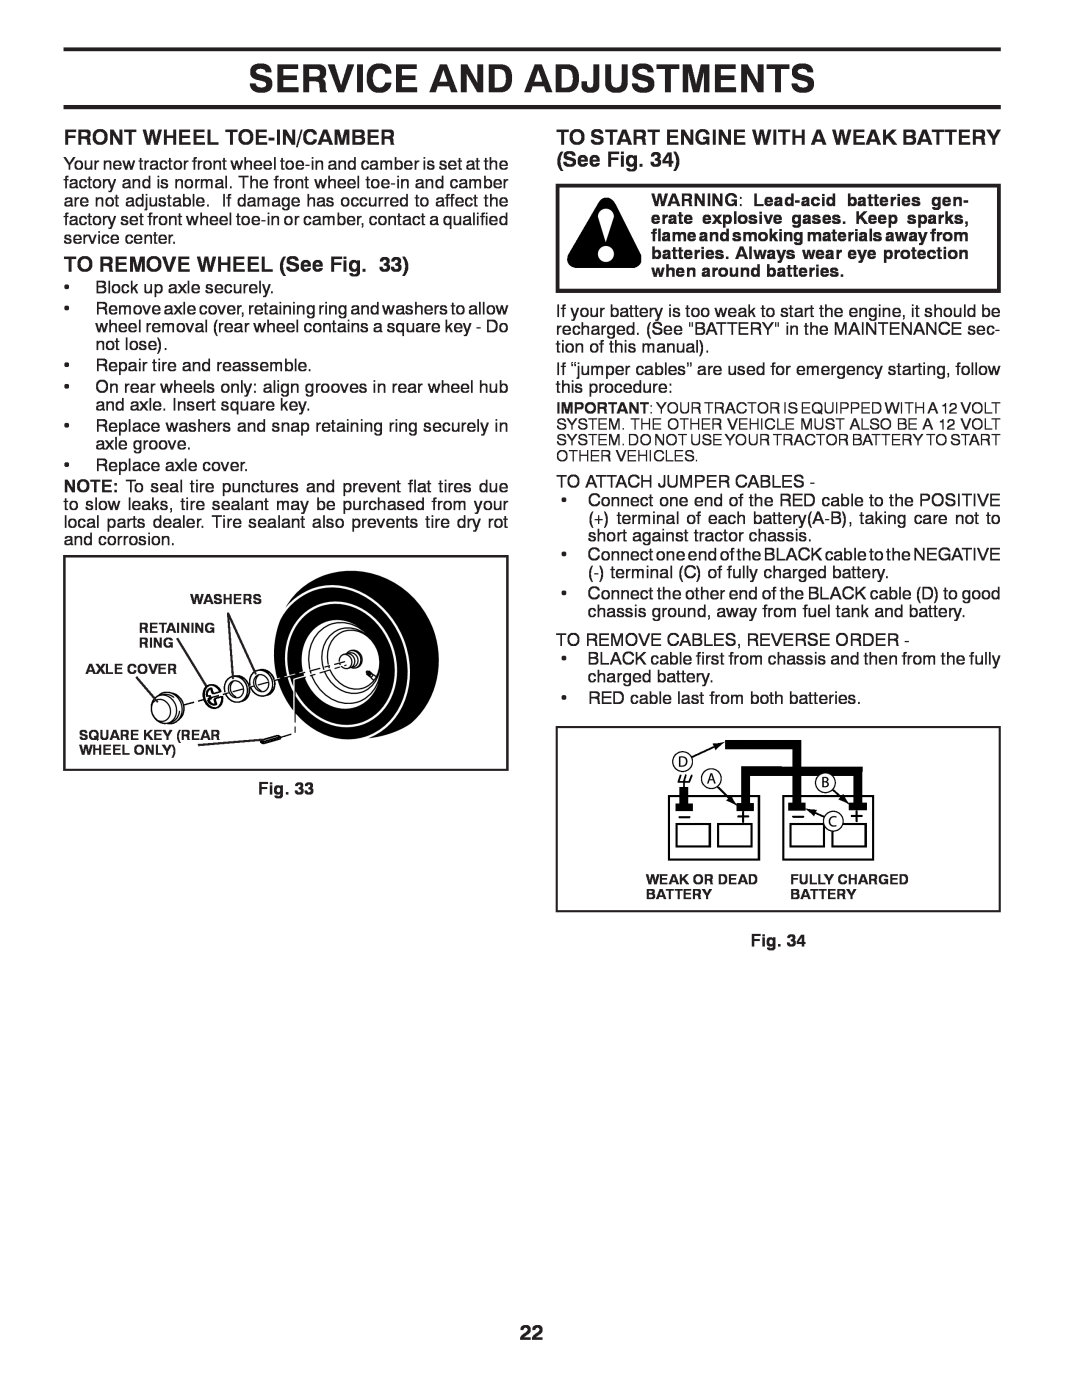 Poulan 532 43 85-70, 96042012500 manual Service And Adjustments, Front Wheel Toe-In/Camber, TO REMOVE WHEEL See Fig 